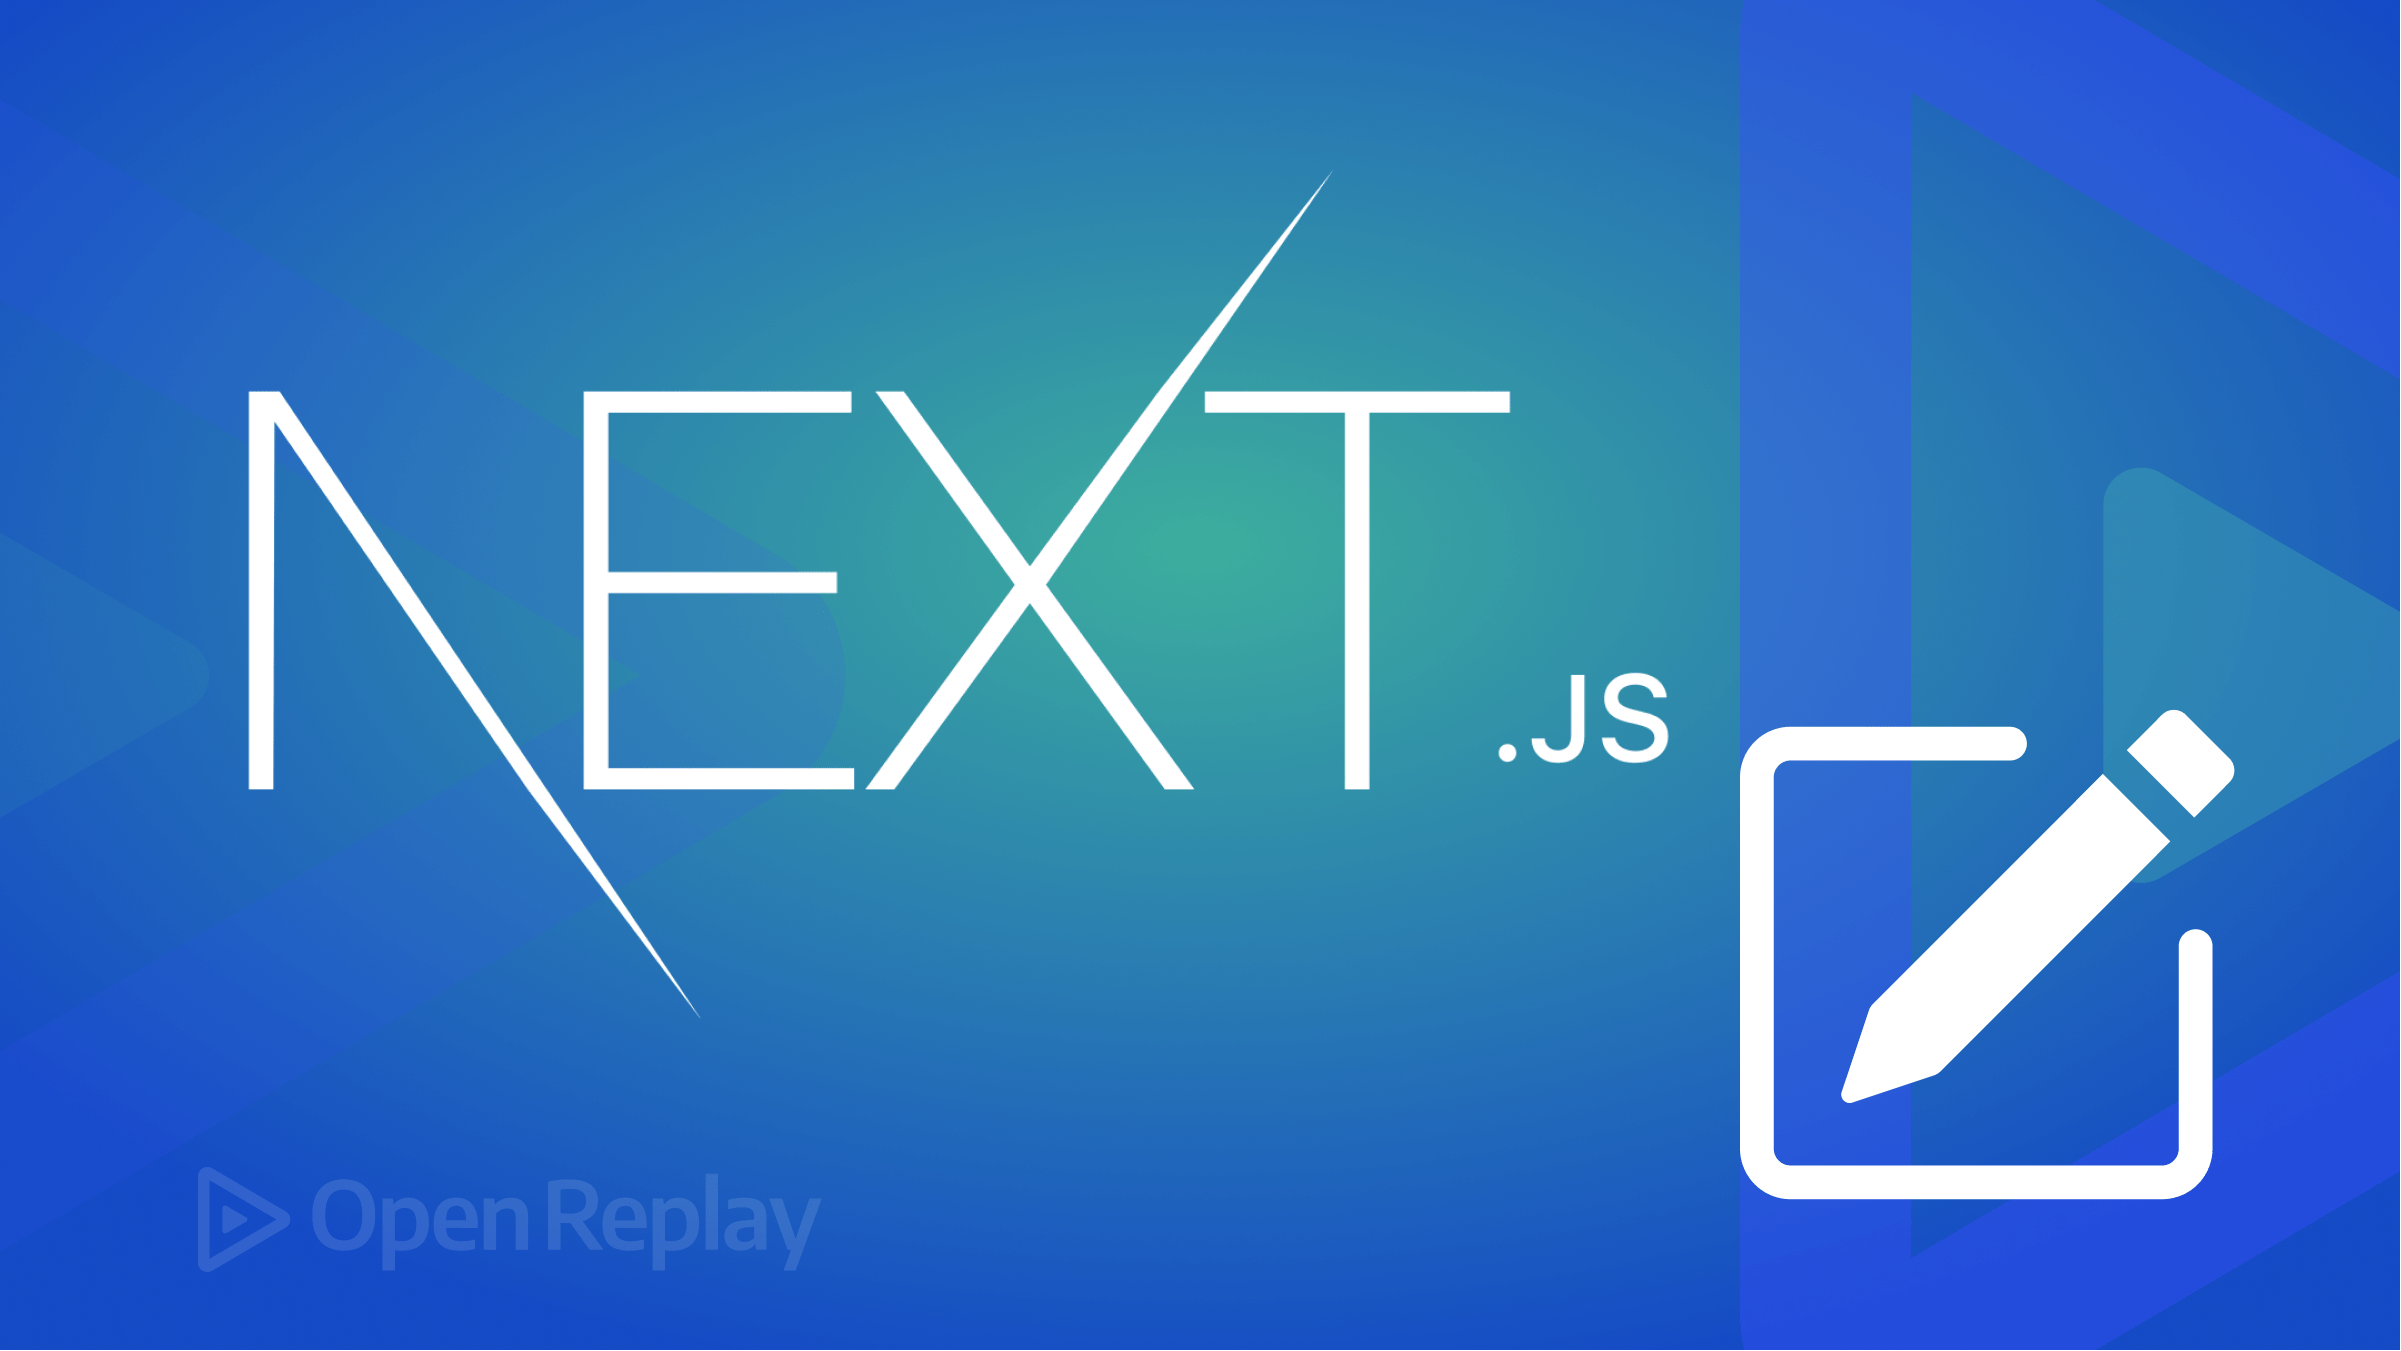 Implementing a feedback form with Next.js